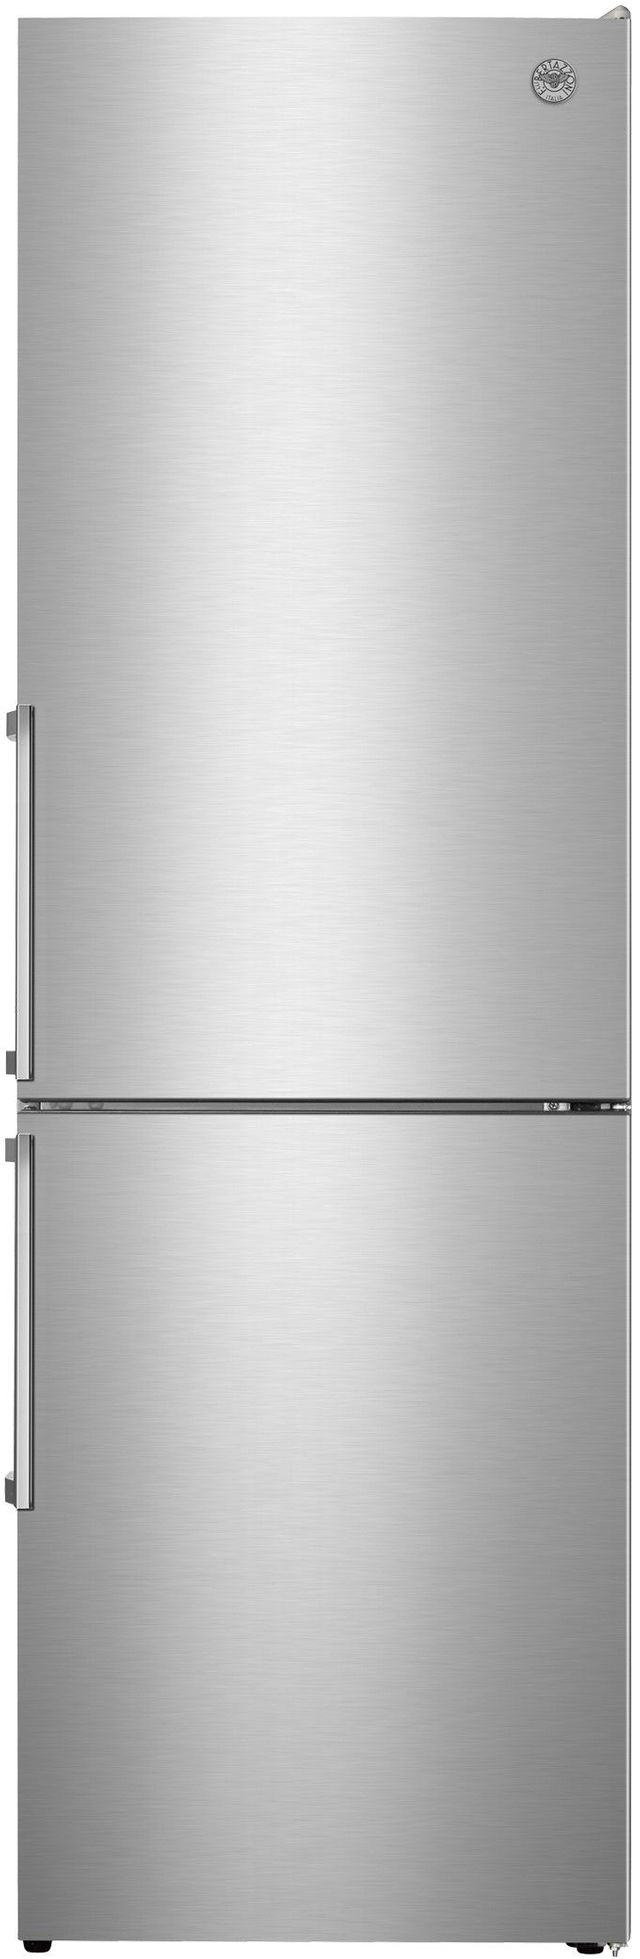 Bertazzoni Professional and Master Series 11.5 Cu. Ft. Stainless Steel Counter Depth Freestanding Bottom Mount Refrigerator-0